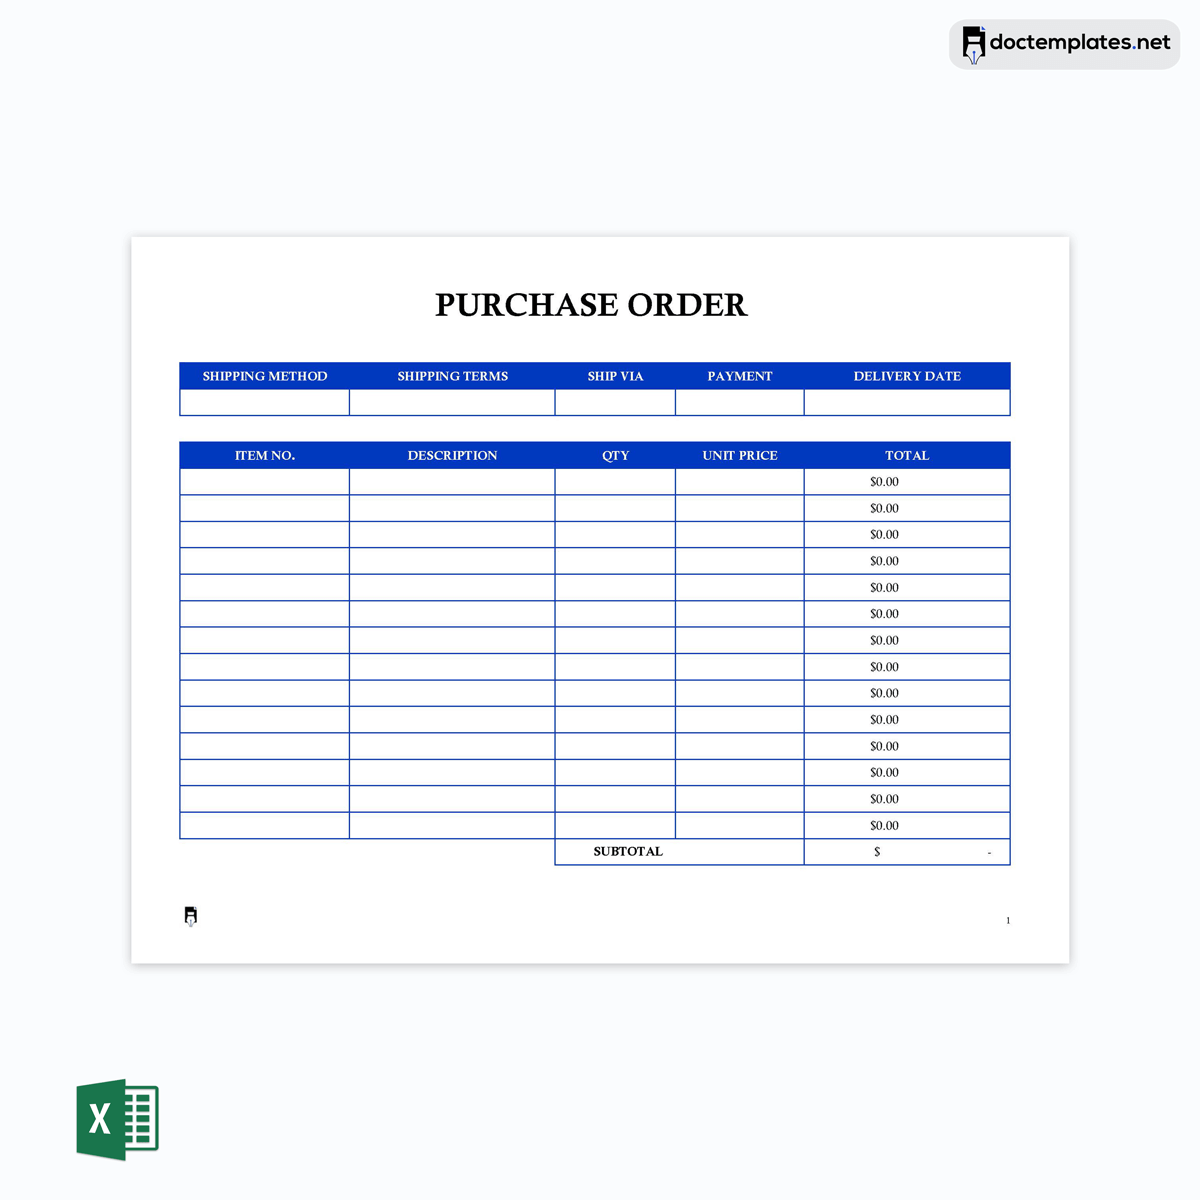 Purchase Order excel